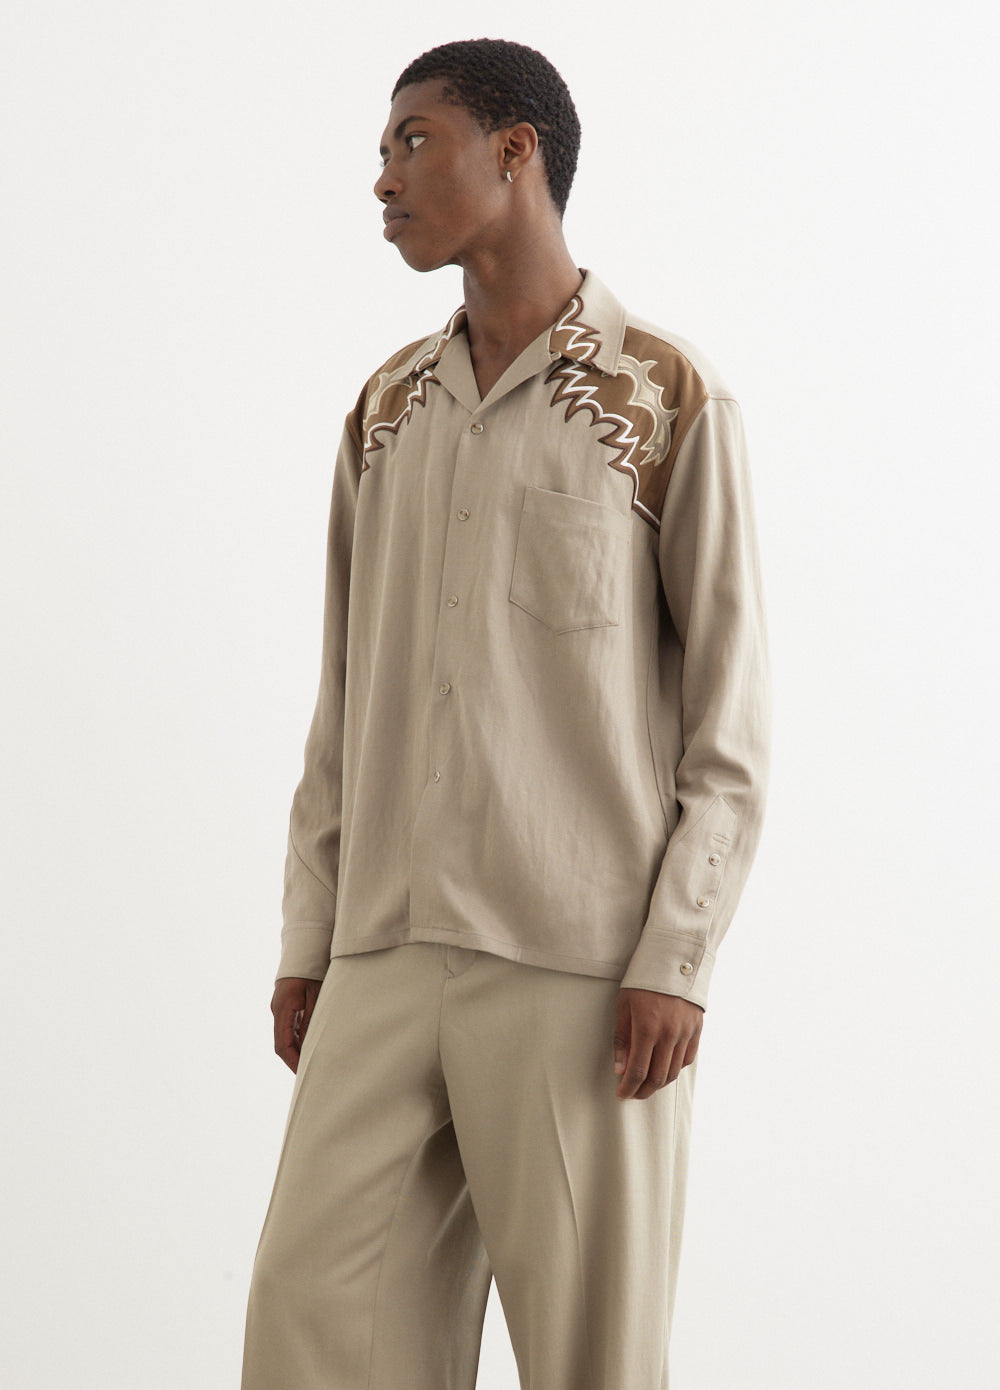 Embroidery Western Shirt